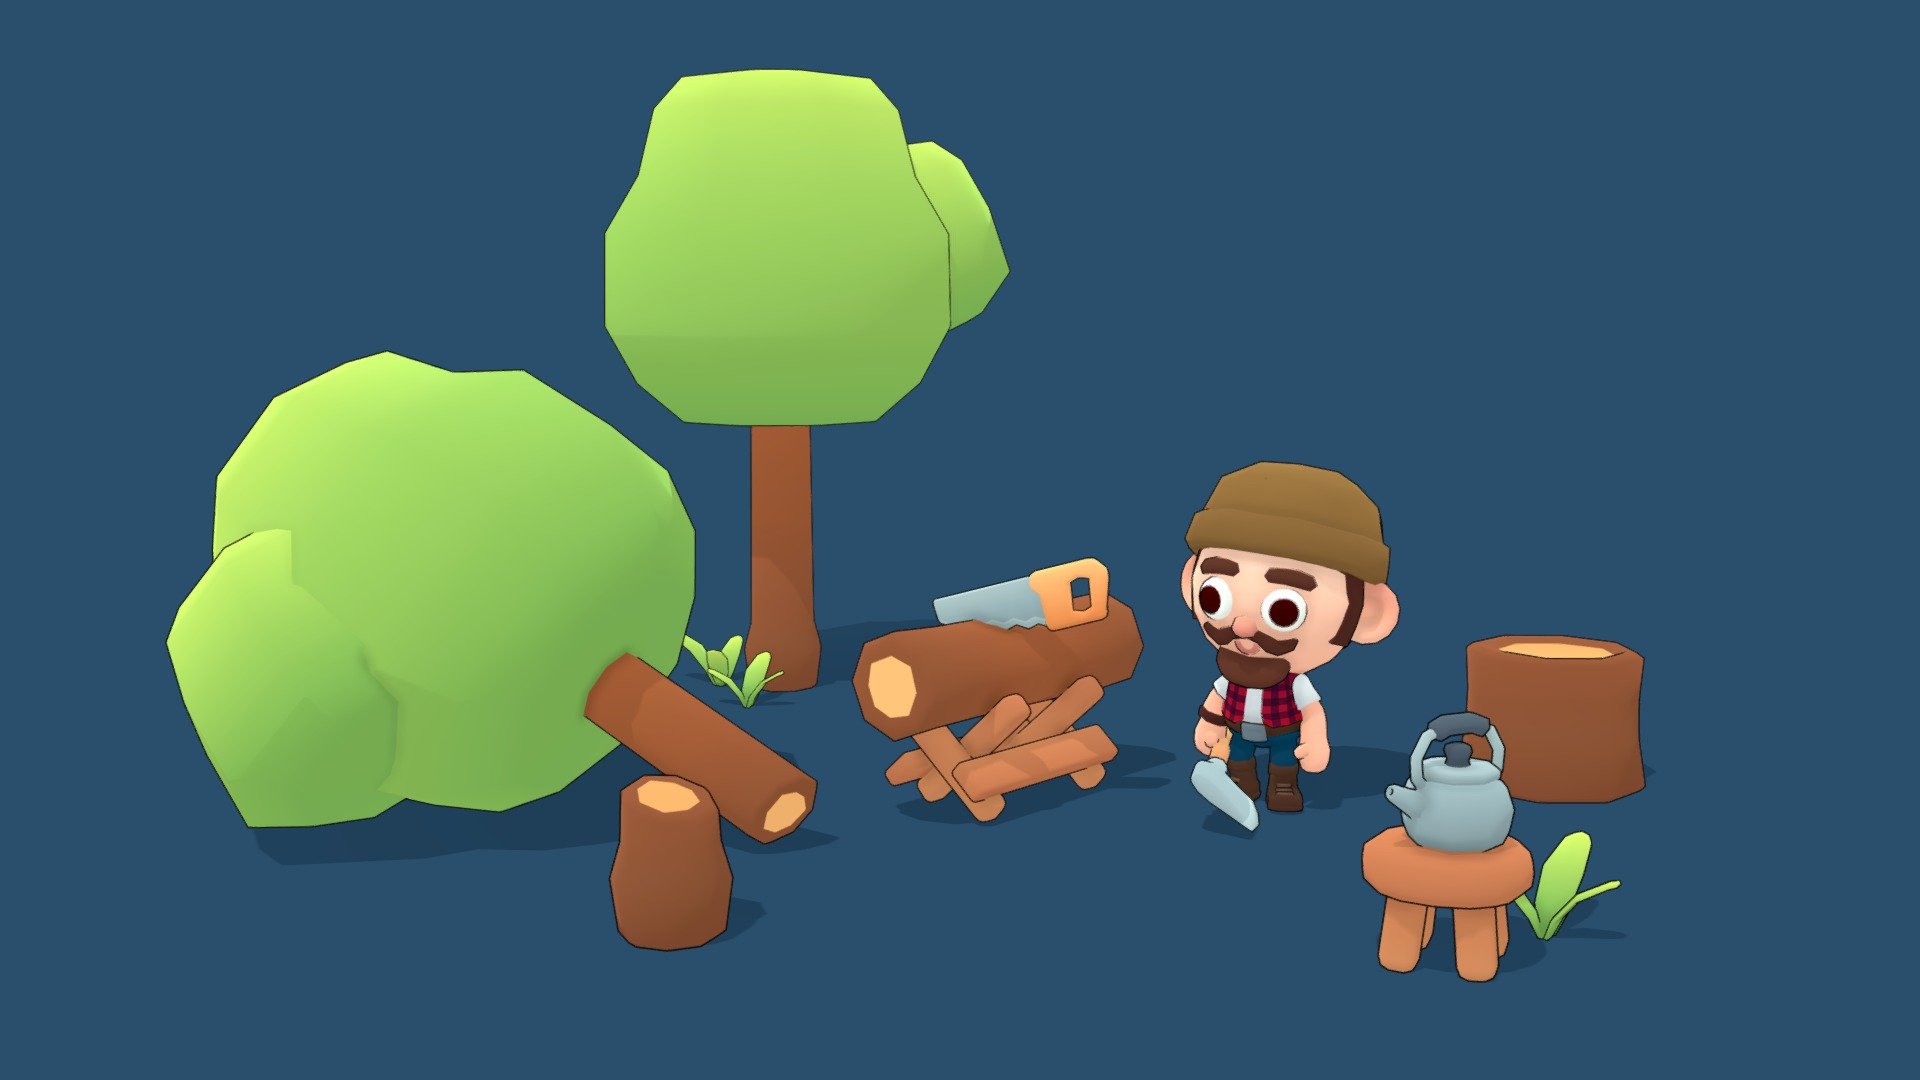 Lowpoly modular character and props for game development.

Available on Unity Asset Store

*Check the additional zipped file when buying this pack to access the rigged character, props and textures.



-Rigged/Skinned

-Mecanim Ready

-Texture: 256px Diffuse





-Polycount:



Character:

Puppet Lumberjack |6k Tris



Props:

Axe | 286 Tris

Cavalet | 696 Tris

Grass | 168 Tris

Keettle | 720 Tris

Log | 144 Tris

Saw | 530 Tris

Stool | 624 Tris

Tree | 368 Tris

Tree Chopped | 464 Tris

Tree Stump | 144 Tris




Animations:

Idle

Walk

Run

Jump

Chopping wood




Blendshapes

Eyebrows:

Up

Down

Angry

Sad




Mouth:

Neutral

Sad

Curious - Puppet Lumberjack Pack - Buy Royalty Free 3D model by joaobaltieri 3d model